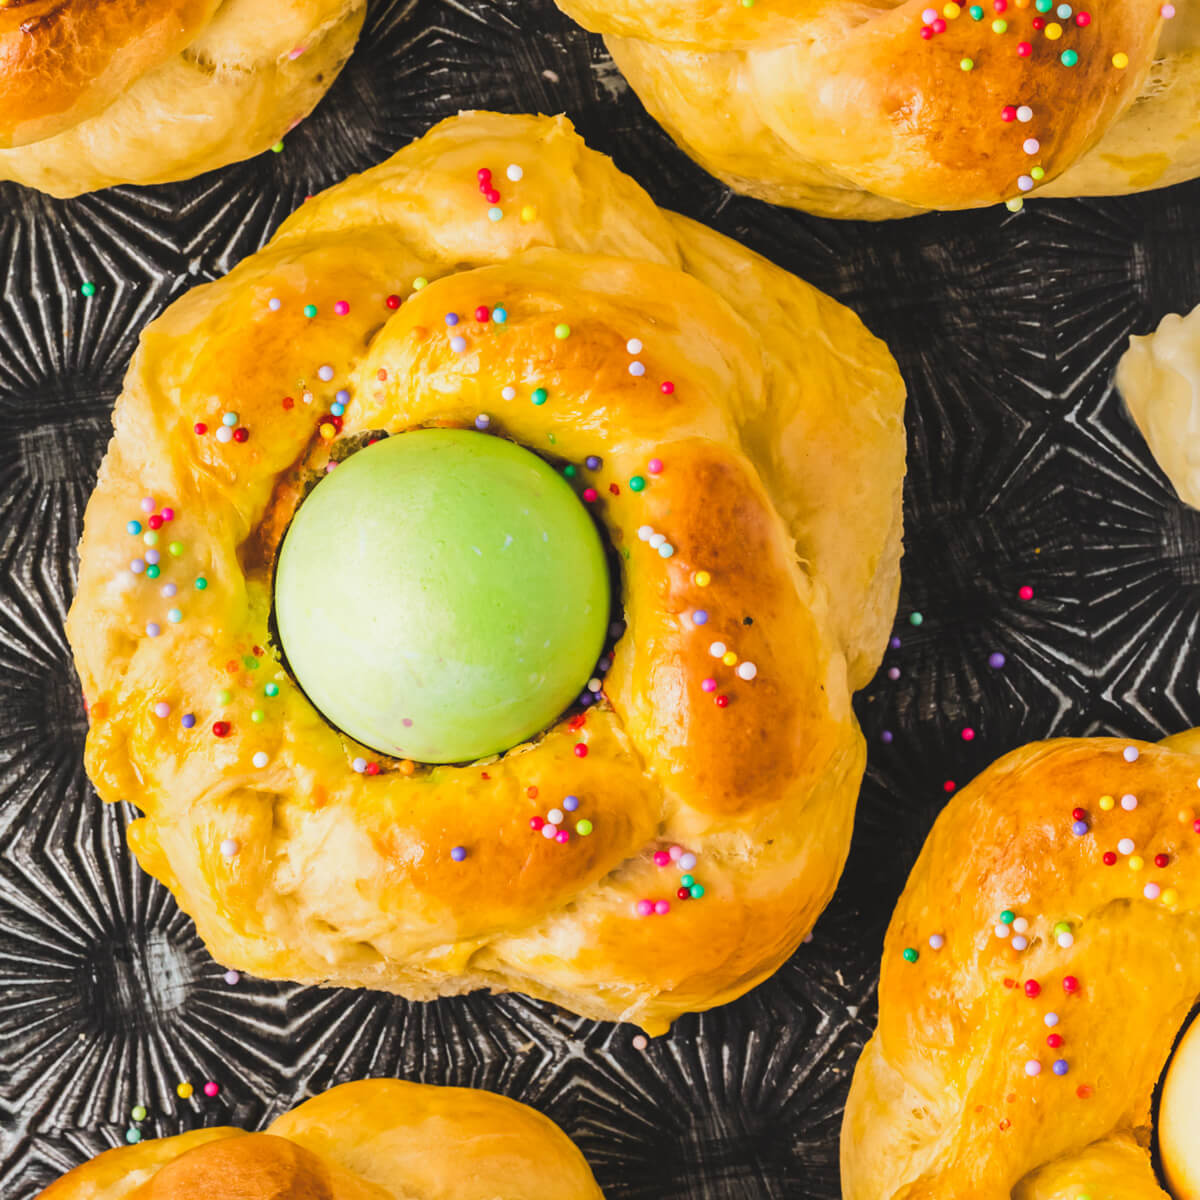 One golden baked Italian Easter Bread filled with a bright green coloured Easter egg on a baking sheet.